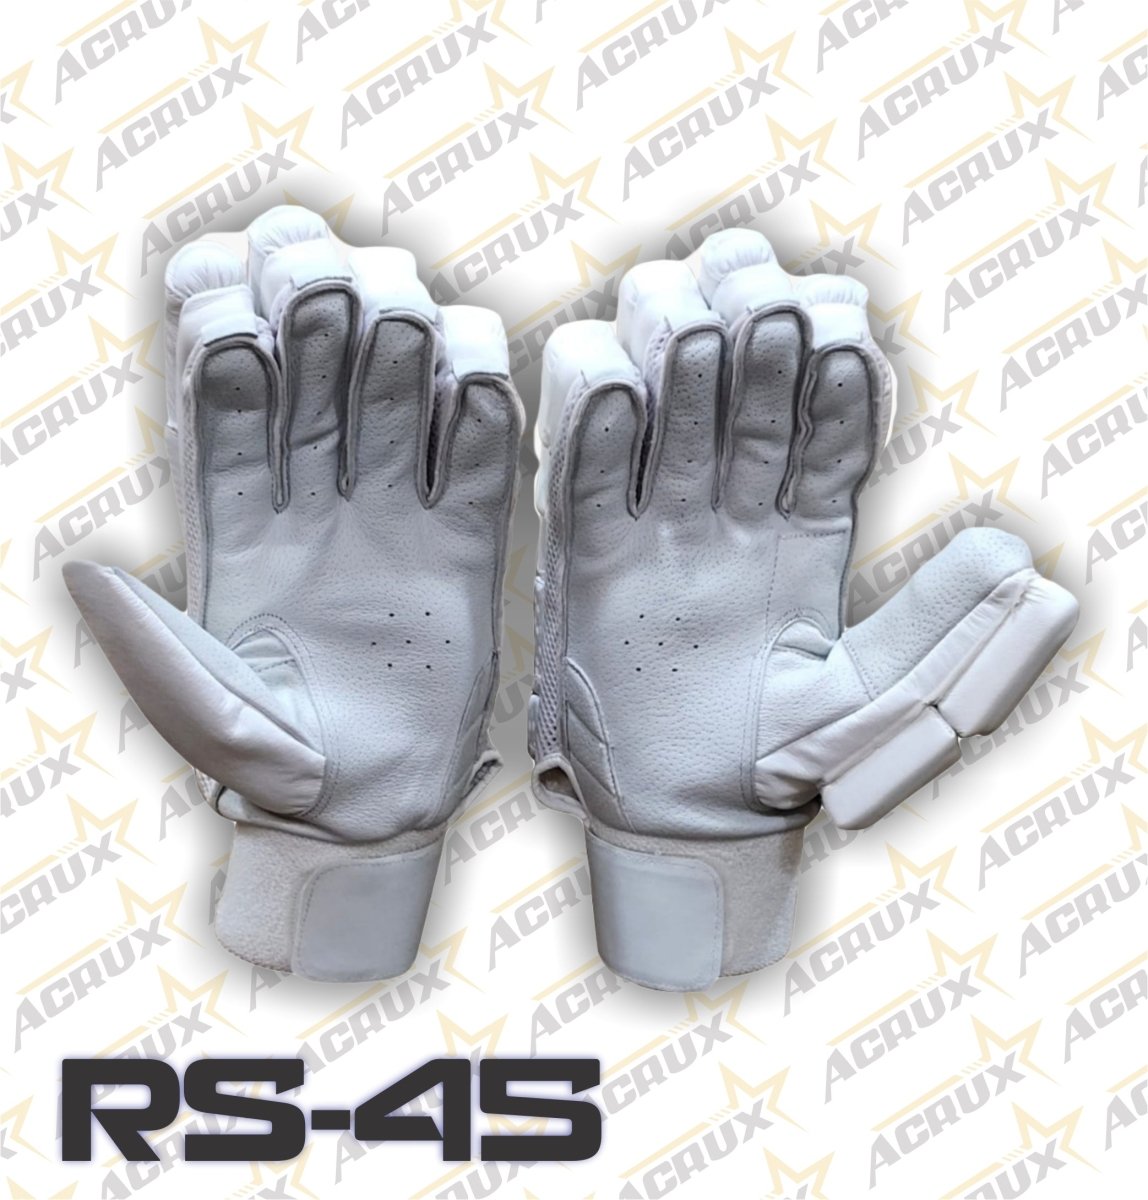 Cricket Batting Gloves RS-45 + Clean Skin Batting Pads Combo